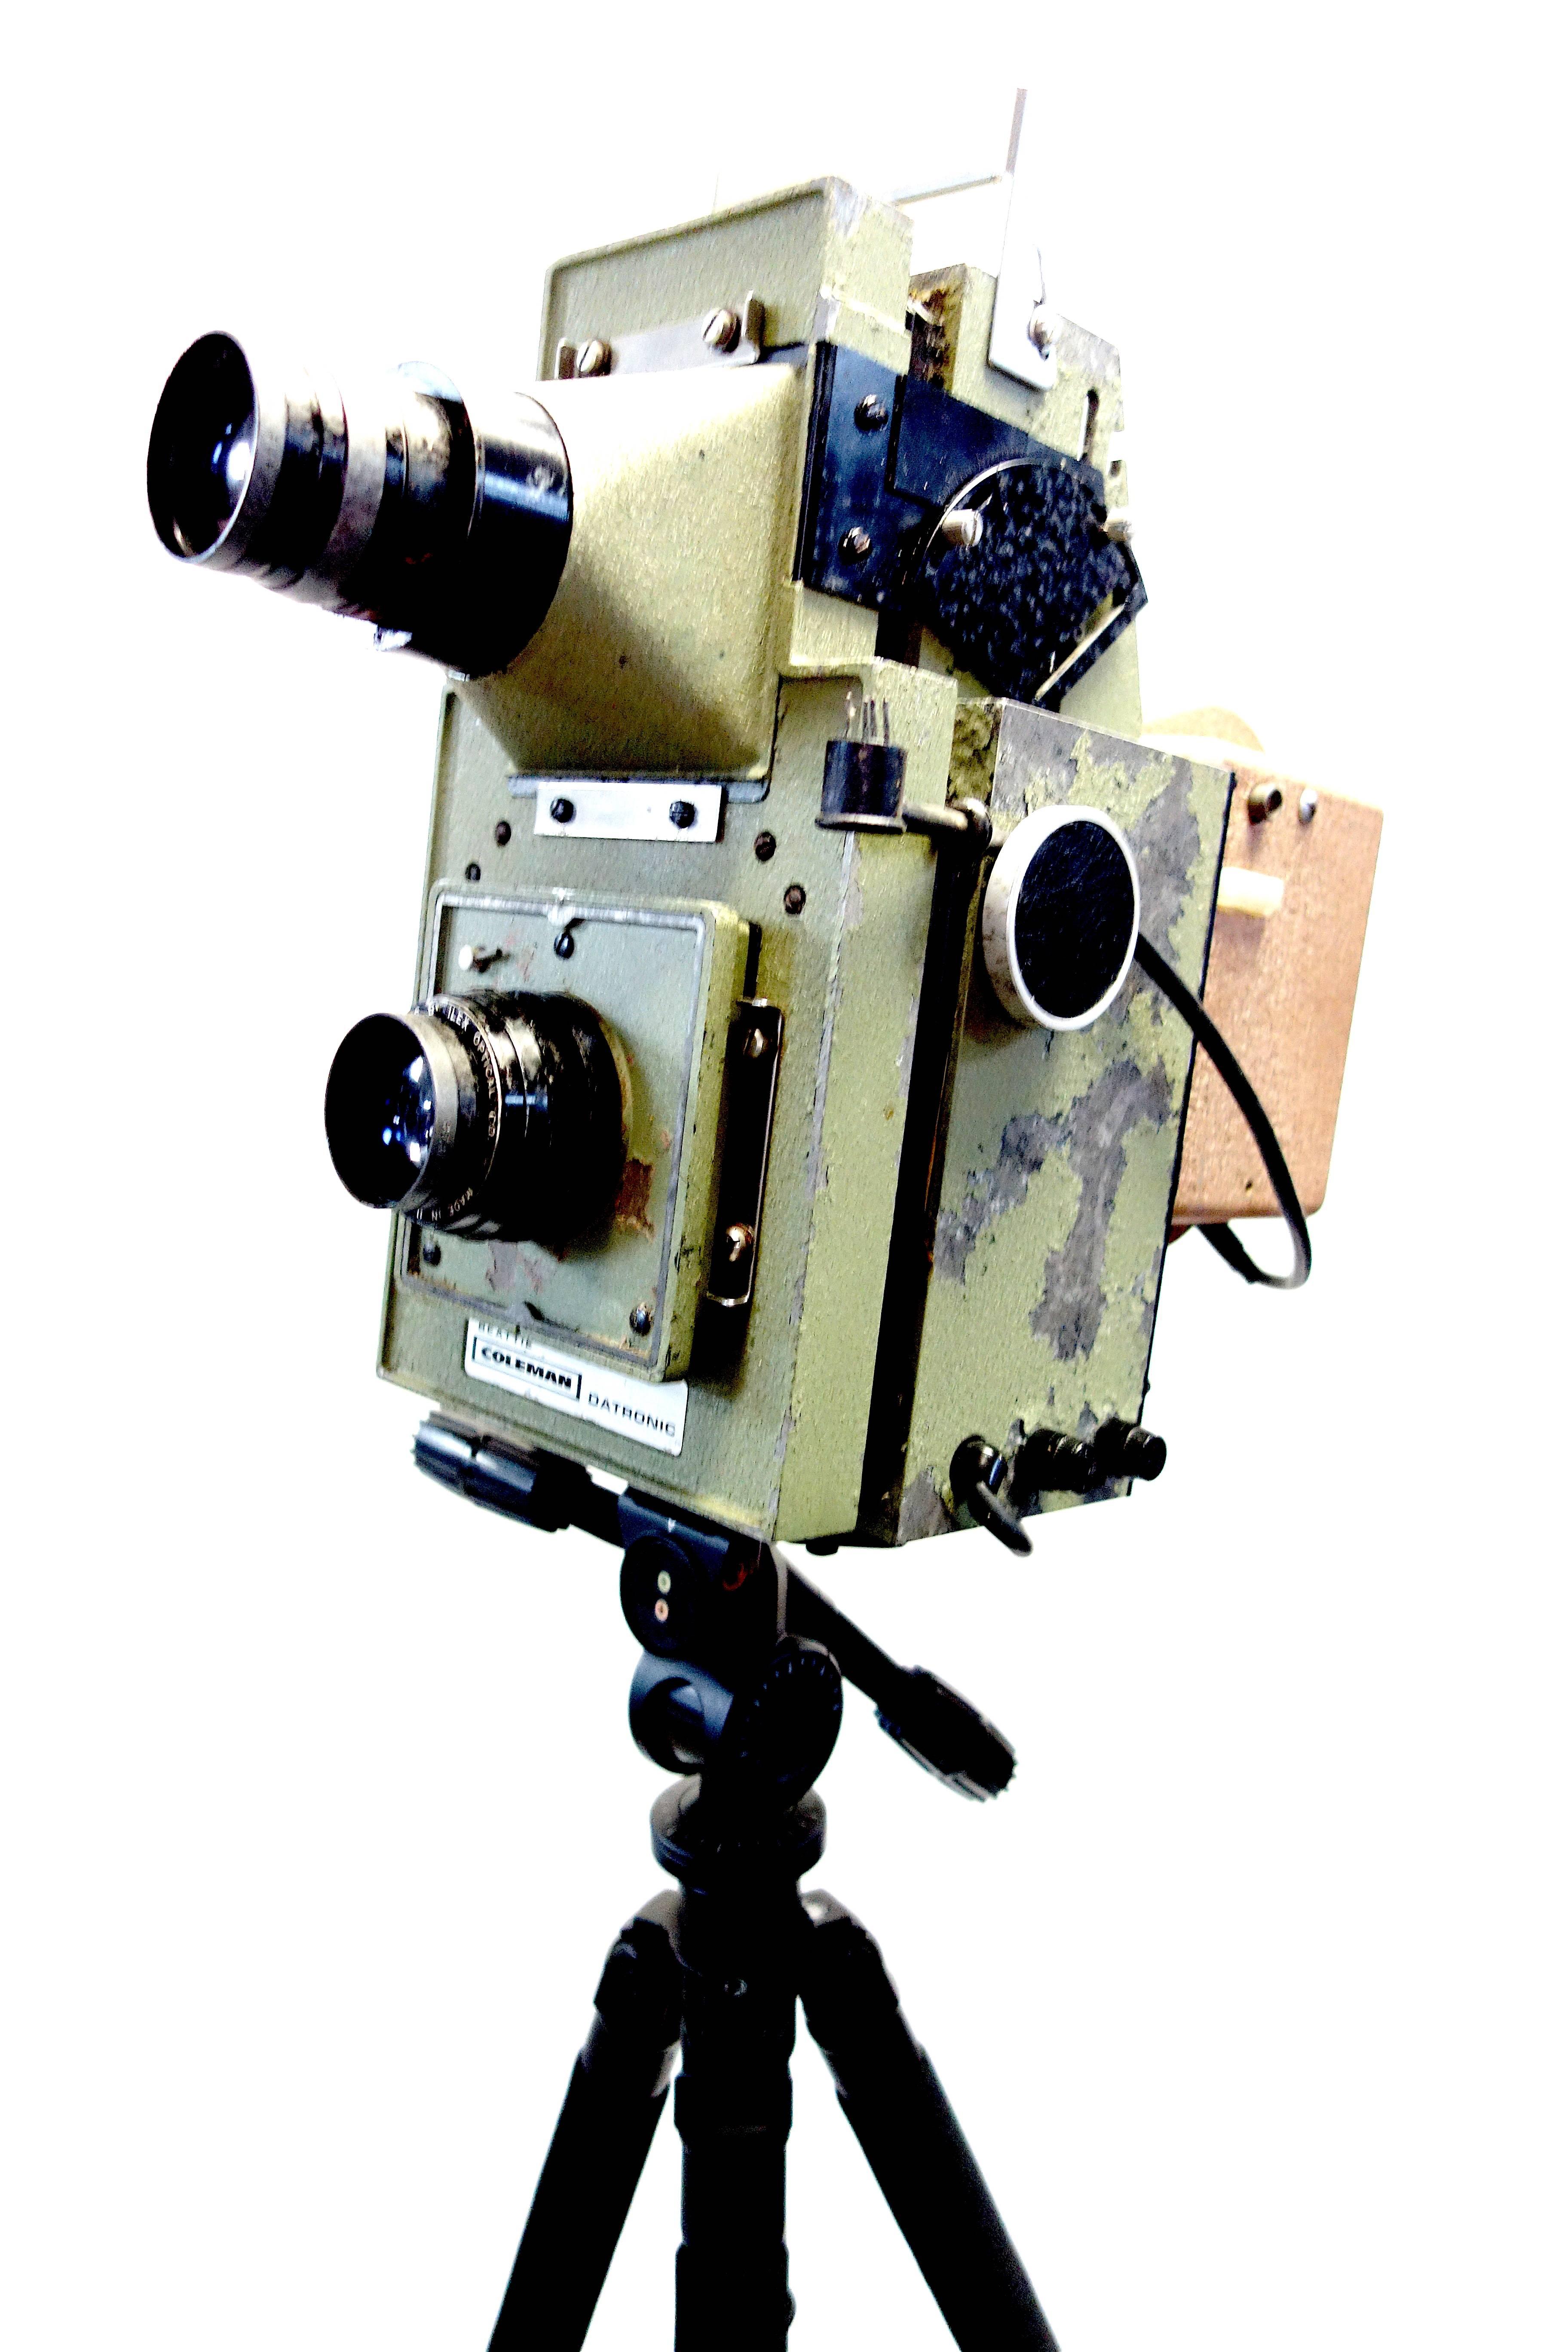 DRASTIC REDUCTION IN PRICE!   TAKE 60% OFF NOW...

AND FREE TRIPOD INCLUDED IN PRICE!


Offered for your consideration is this Mid-Century vintage Coleman 'school class portrait photo camera' used back in the day for taking school class pictures on